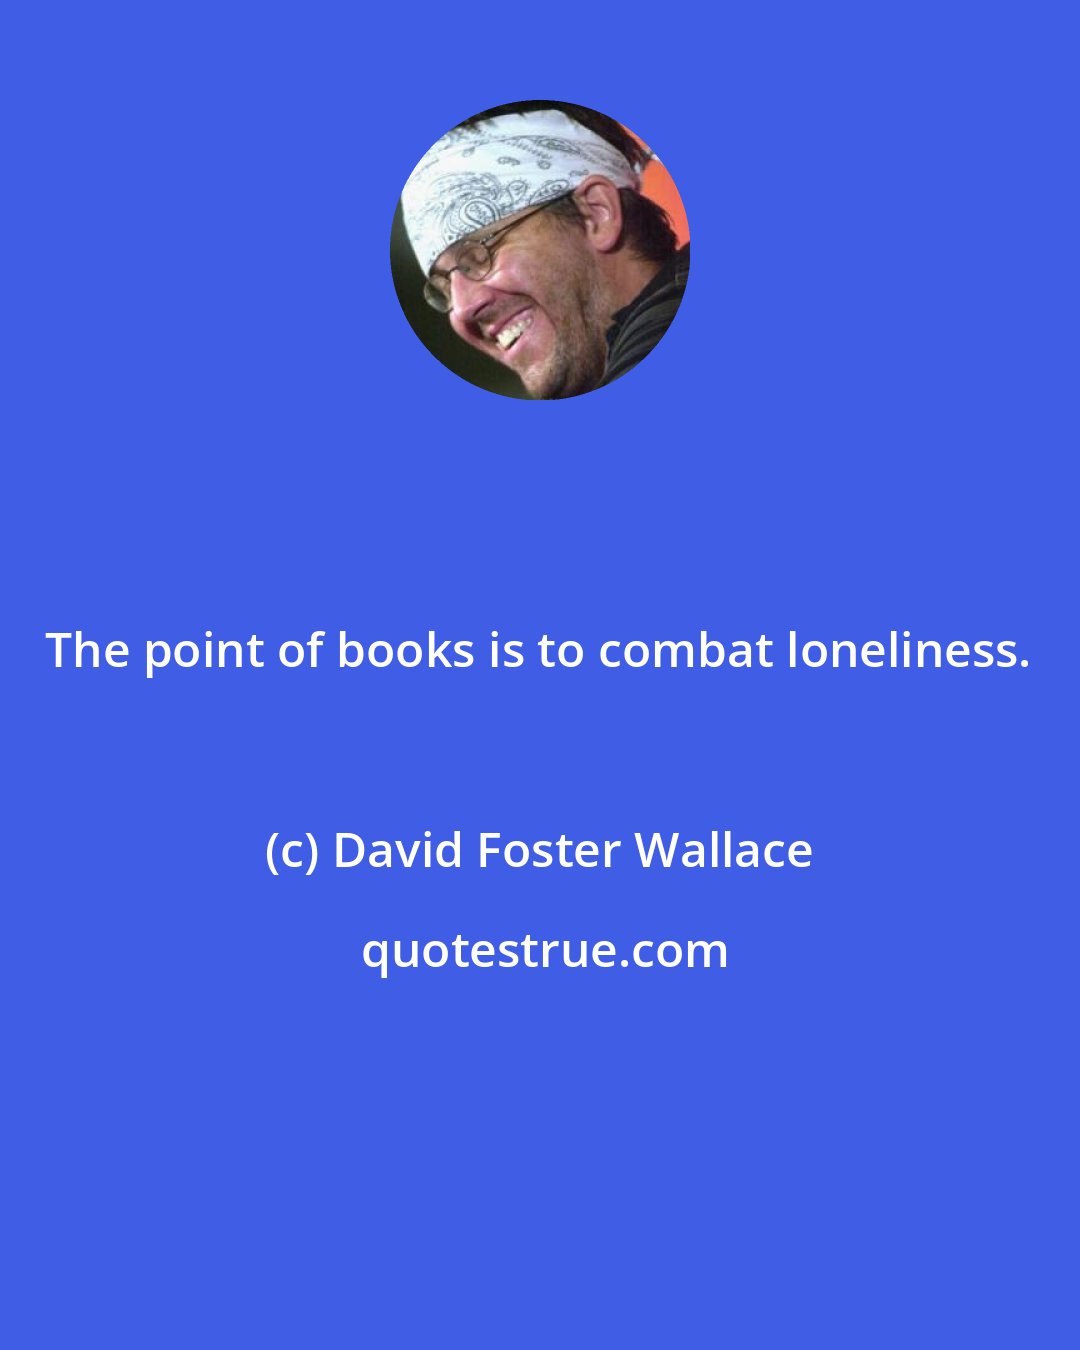 David Foster Wallace: The point of books is to combat loneliness.